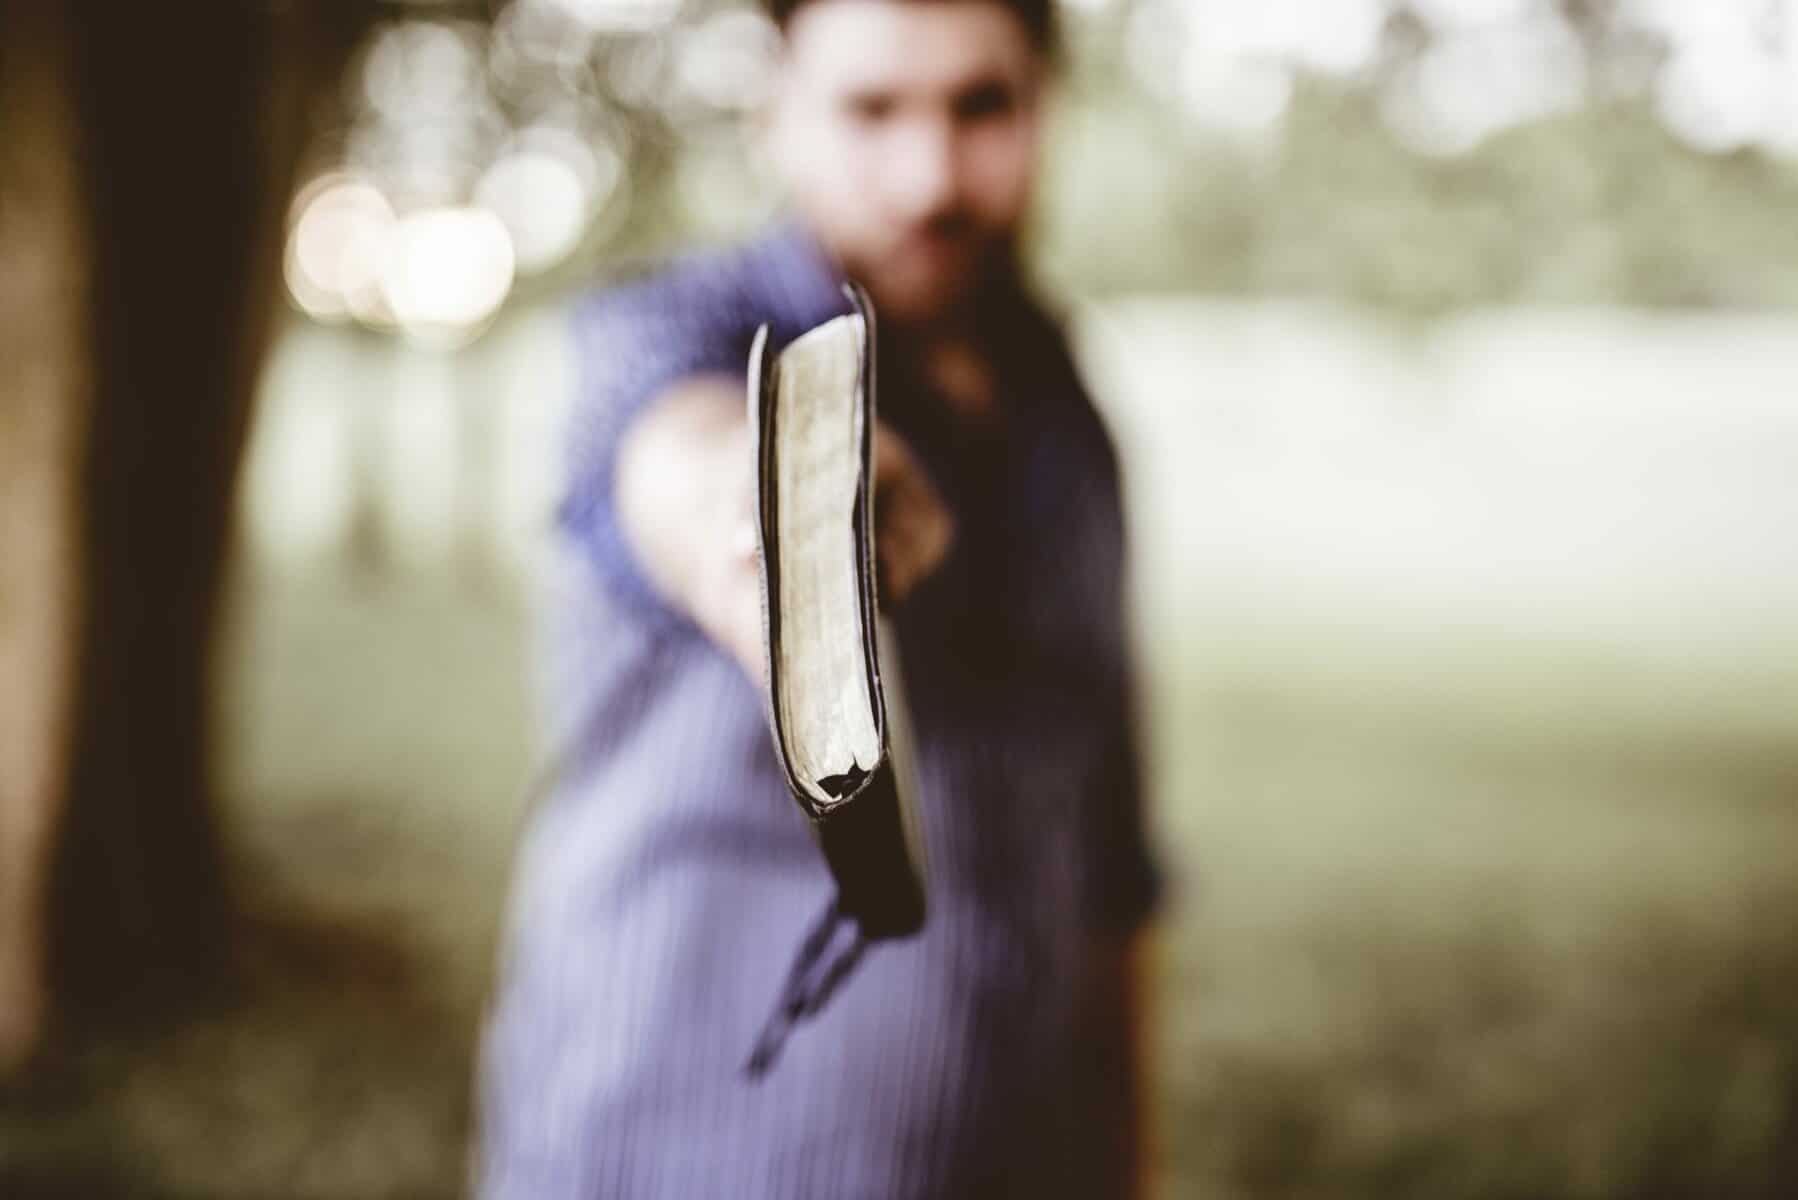 An out of focus many holds an in focus bible in front of himself at arm's length.